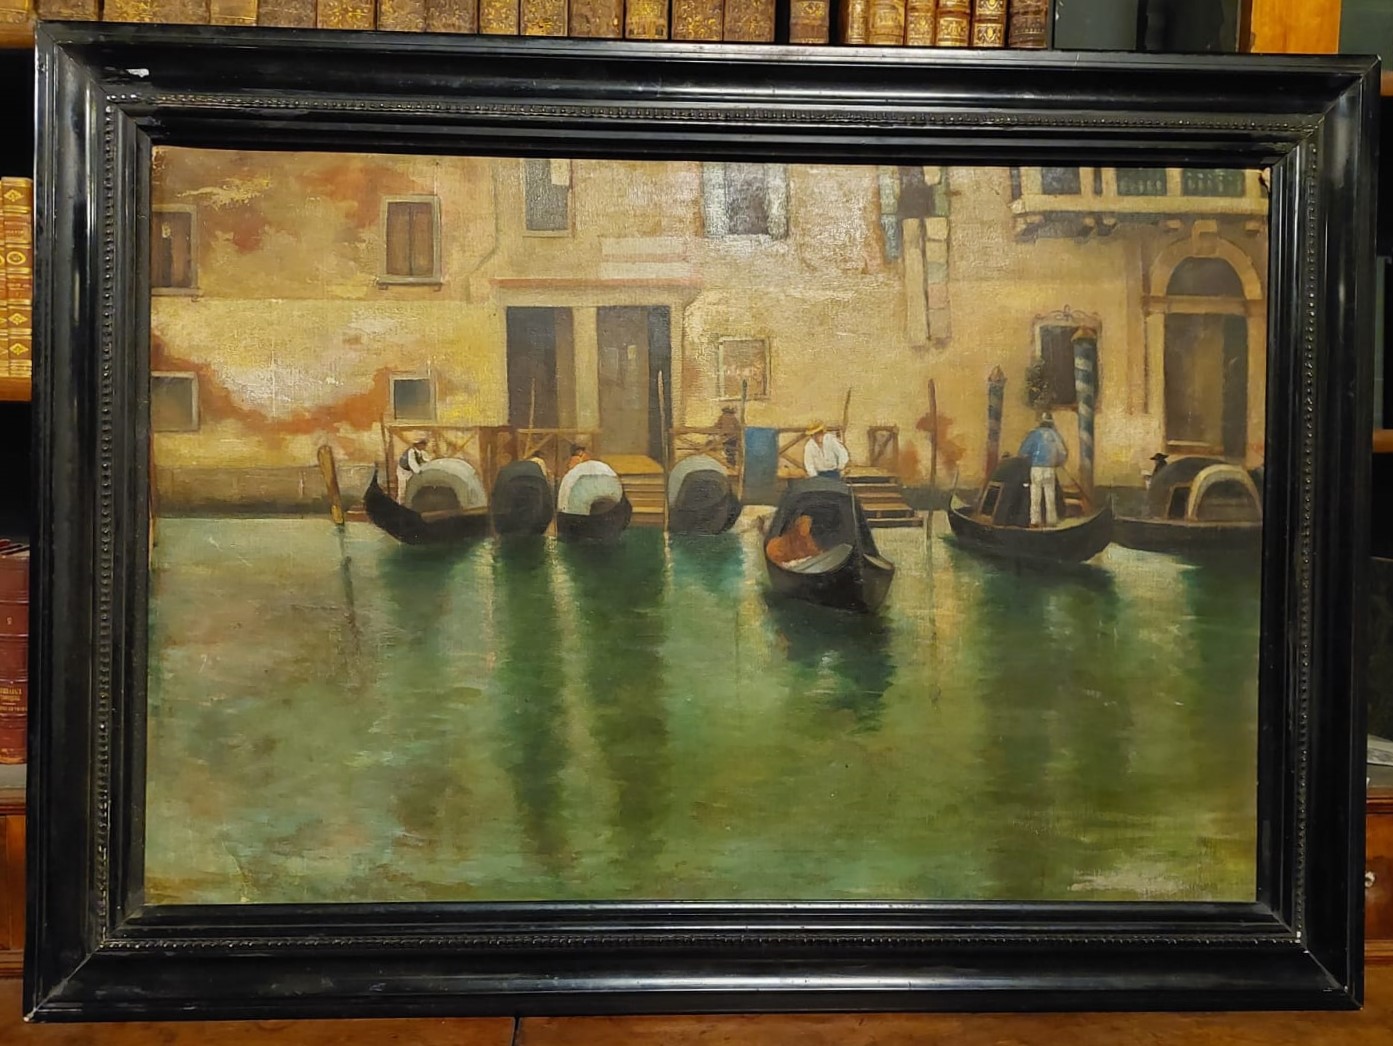 A PAN376 - Painting on canvas representing Venice, 1900s, size cm W 106 x H 77